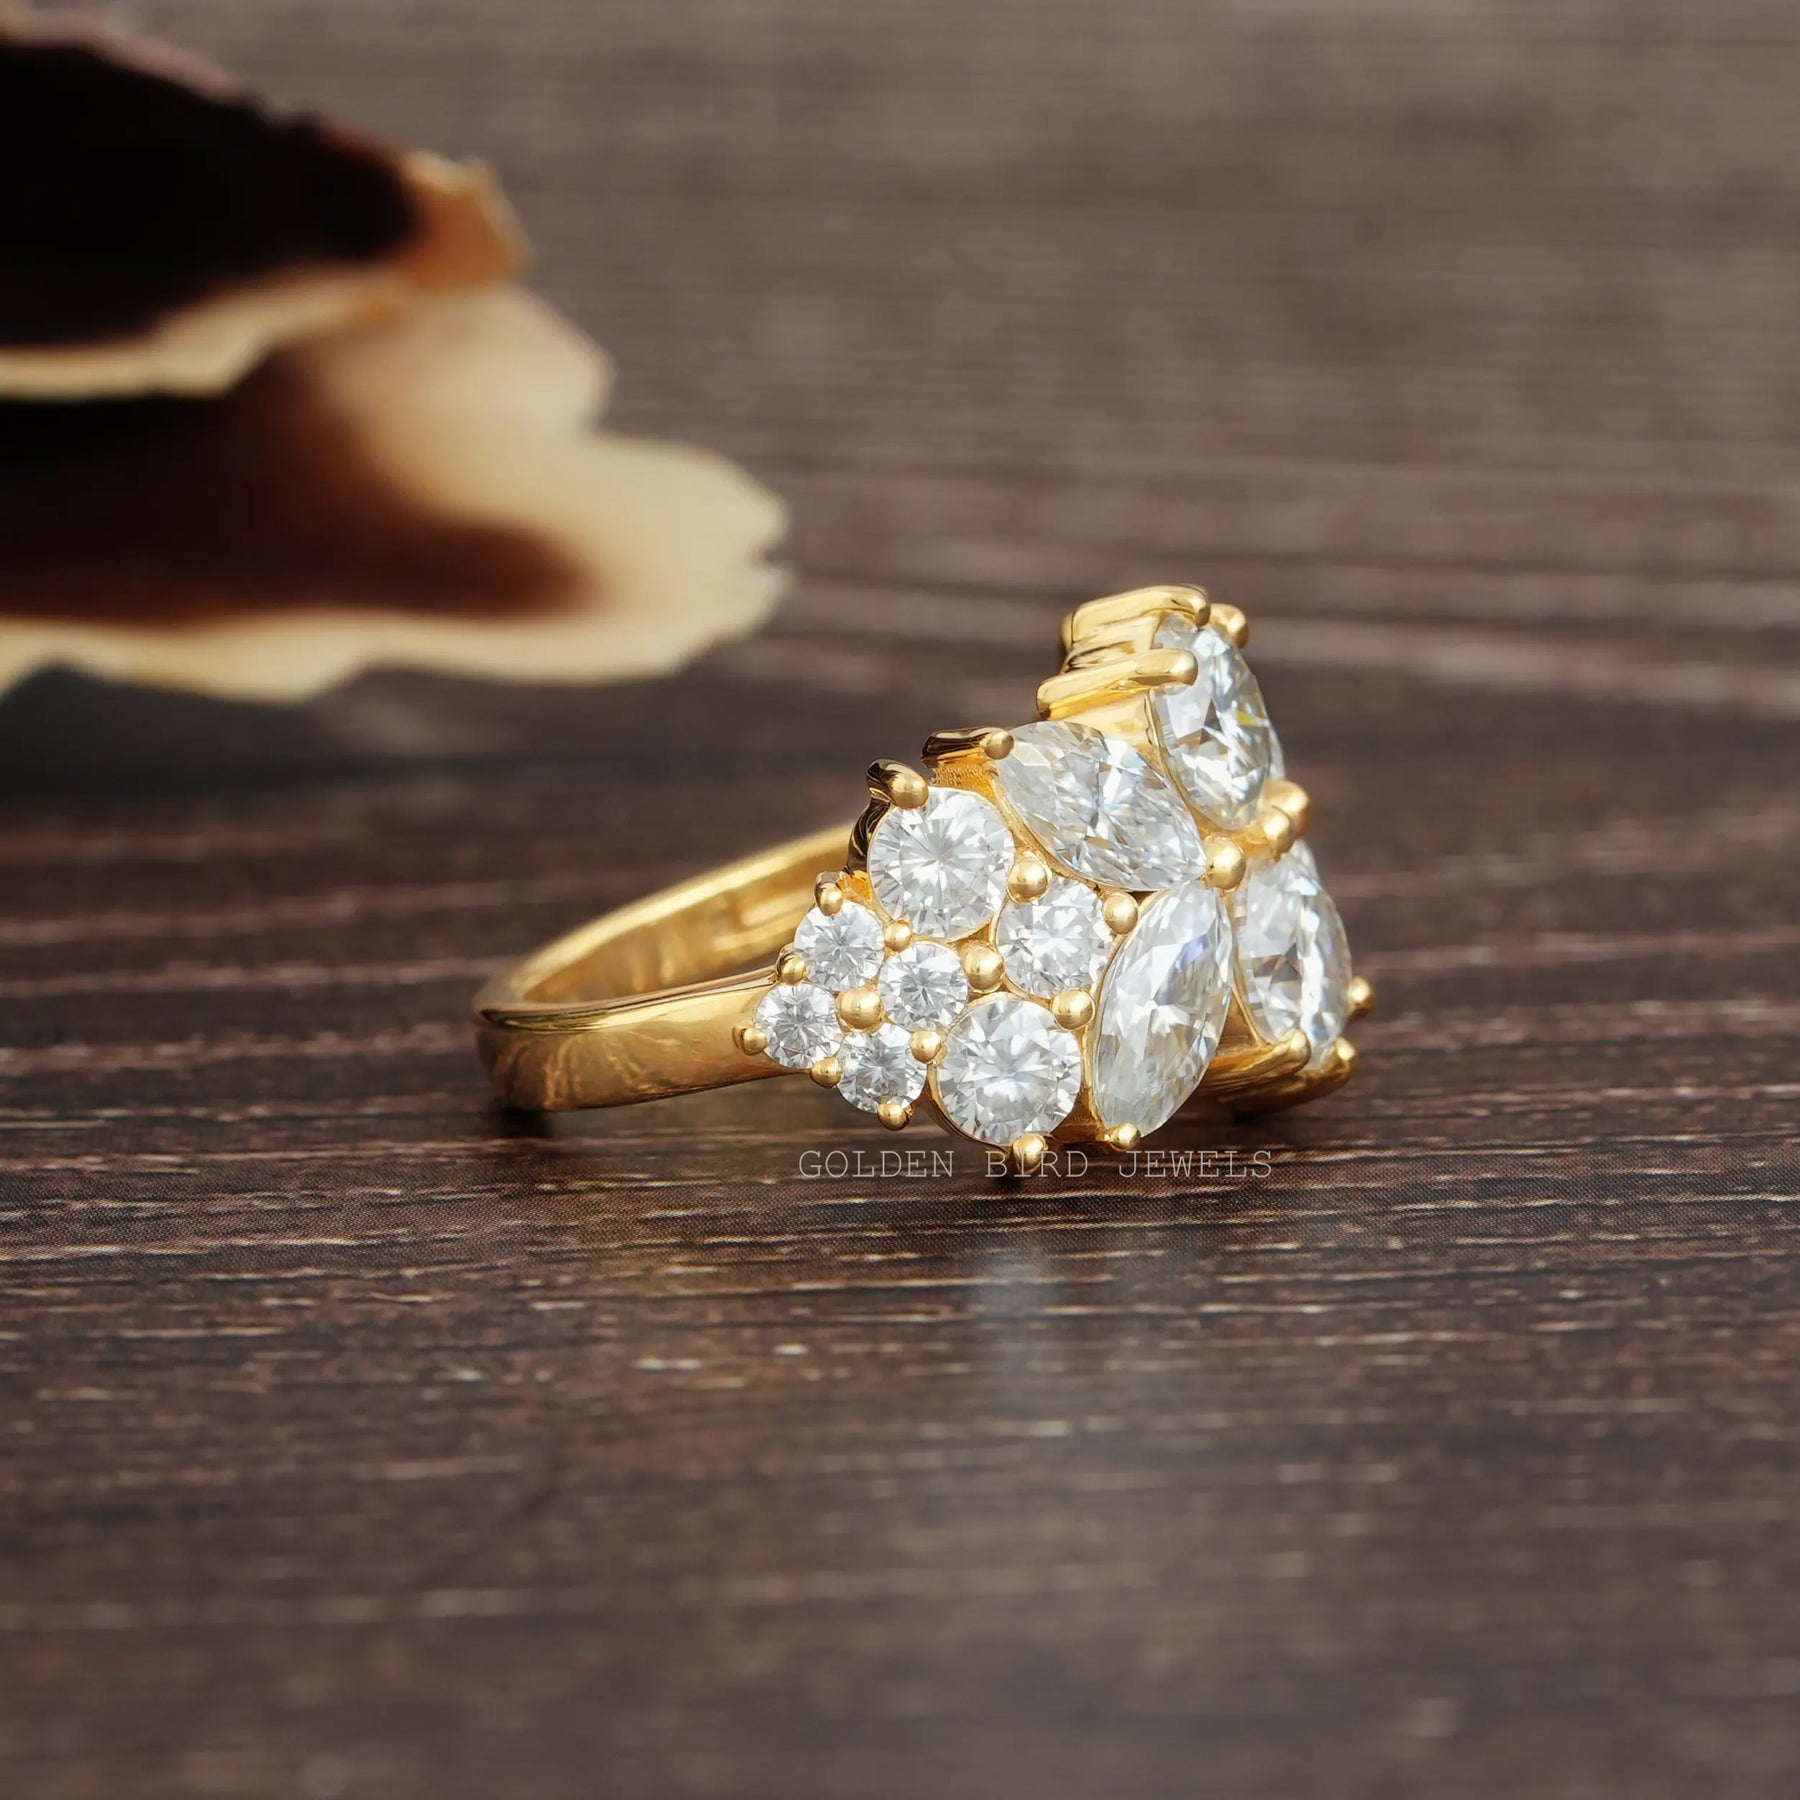 [Moissanite Colorless Multi-Stone Vintage Style Engagement Ring Made Of Yellow Gold]-[Golden Bird Jewels]